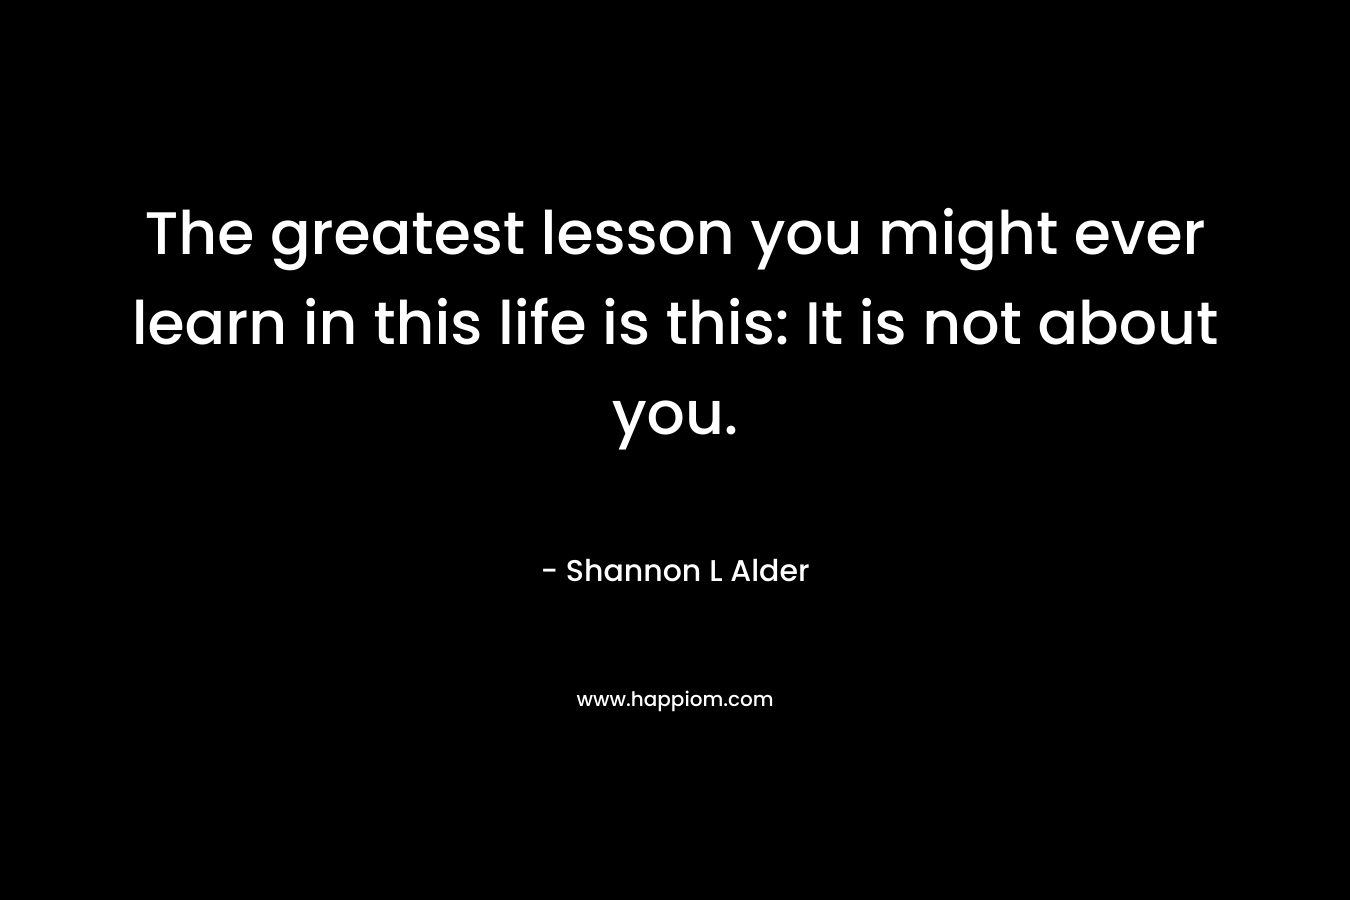 The greatest lesson you might ever learn in this life is this: It is not about you.